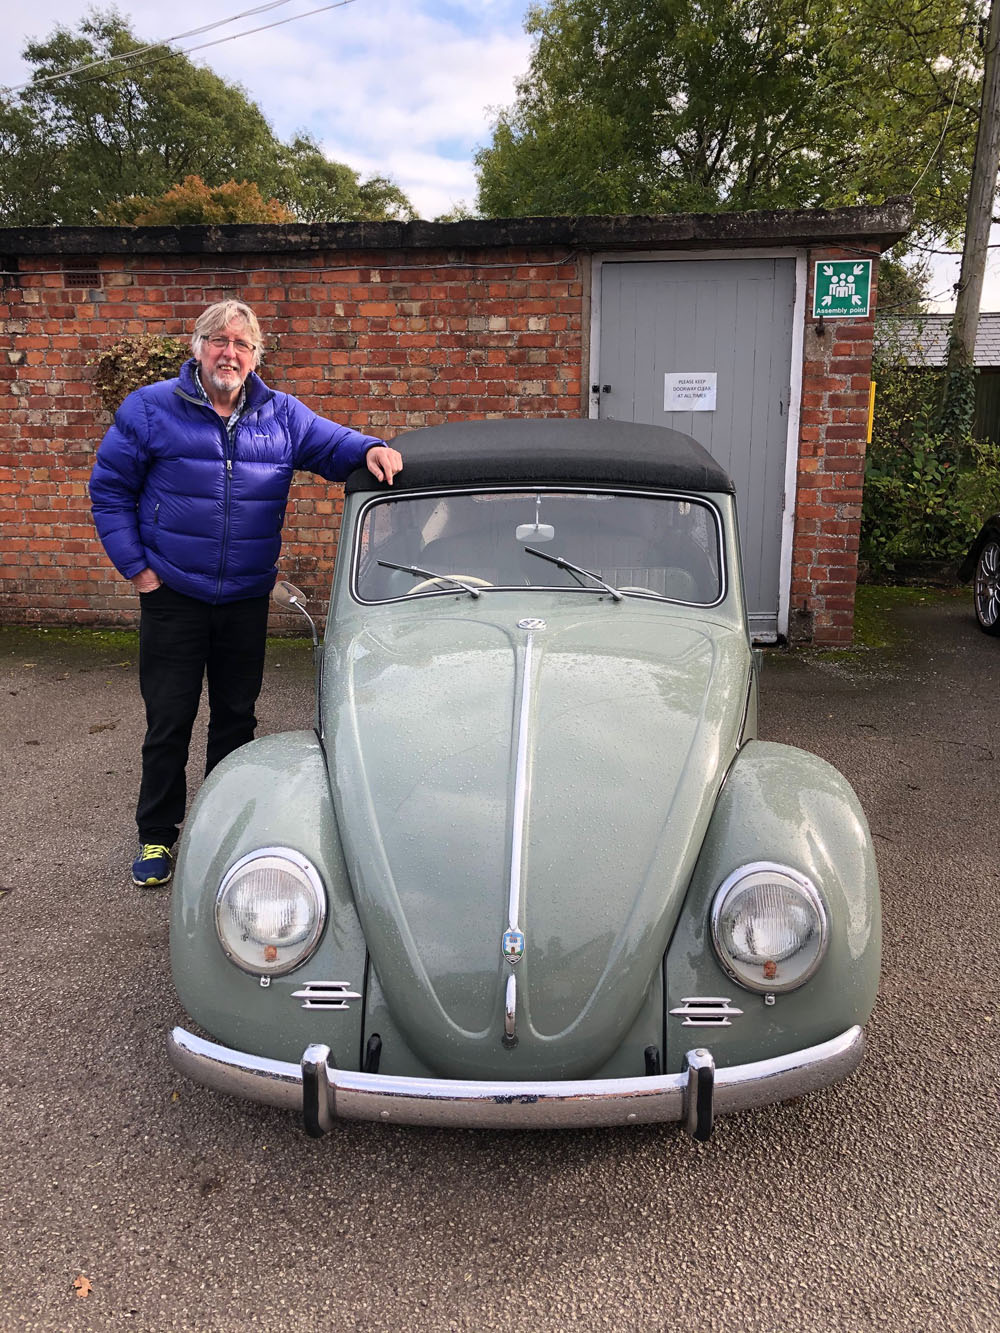 COLIN AND HIS VW BEETLE